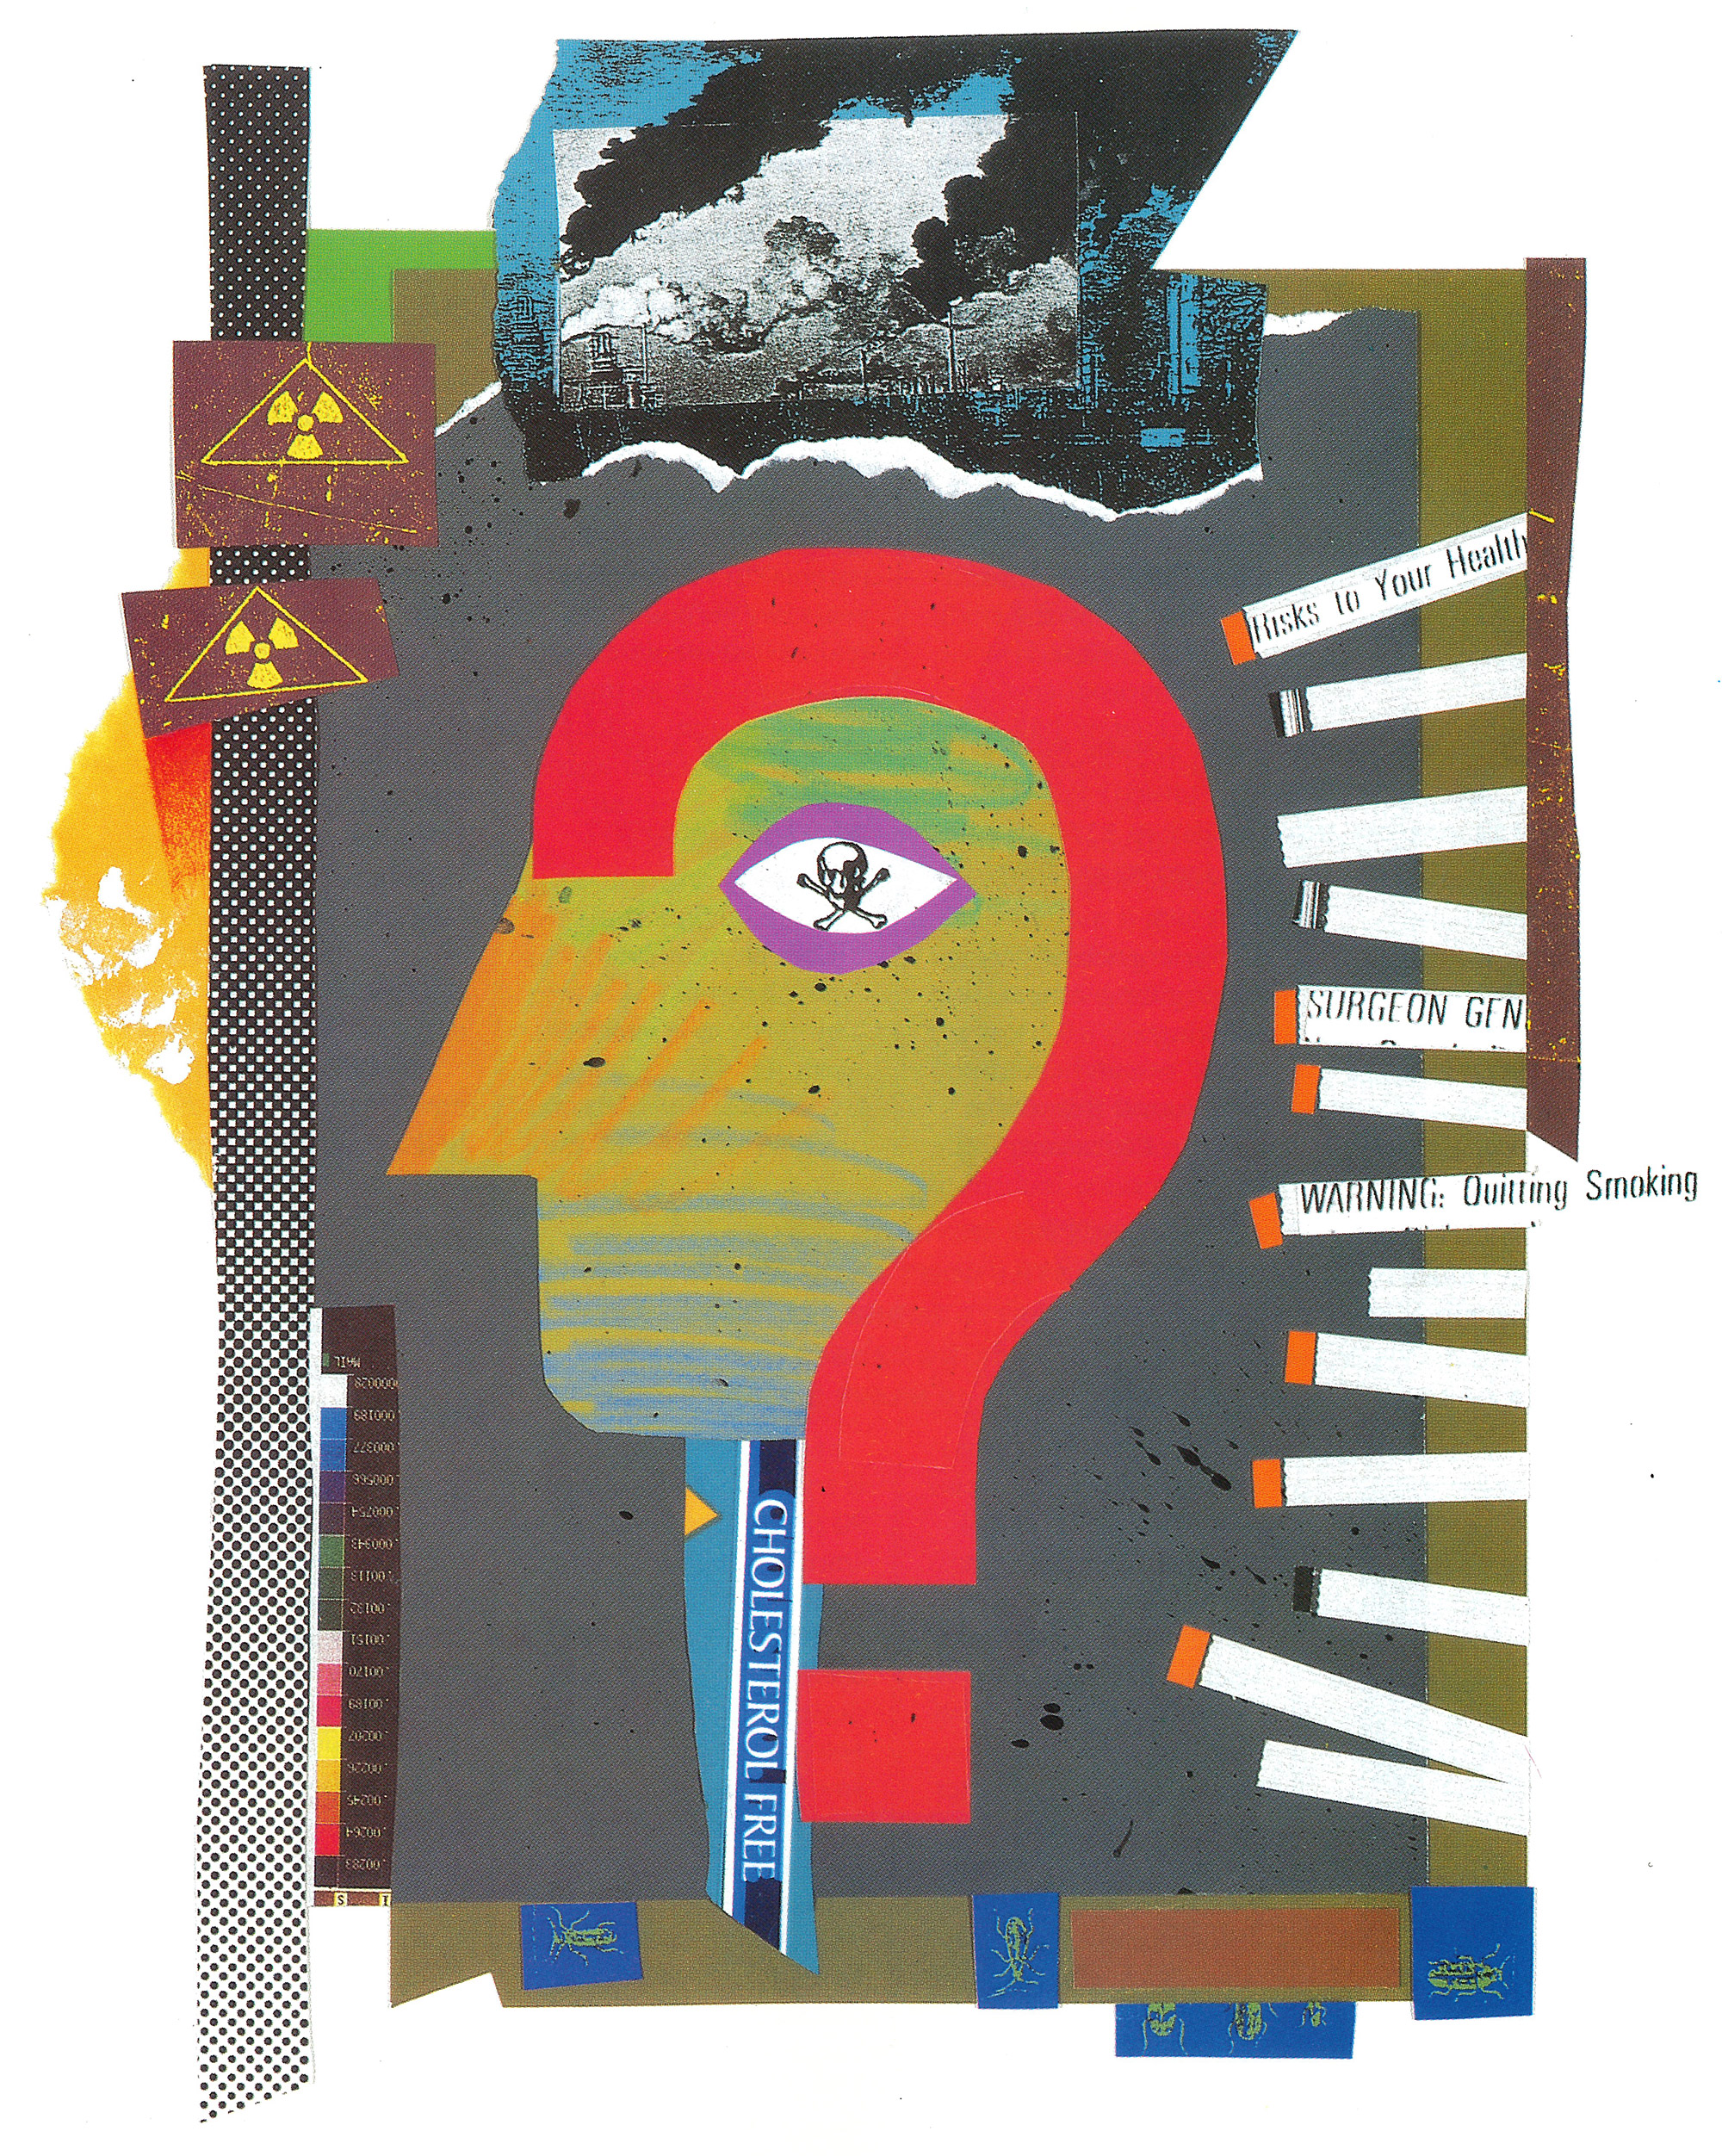 Collage artwork featuring a silhouette of a person's head made of various scraps of colorful paper